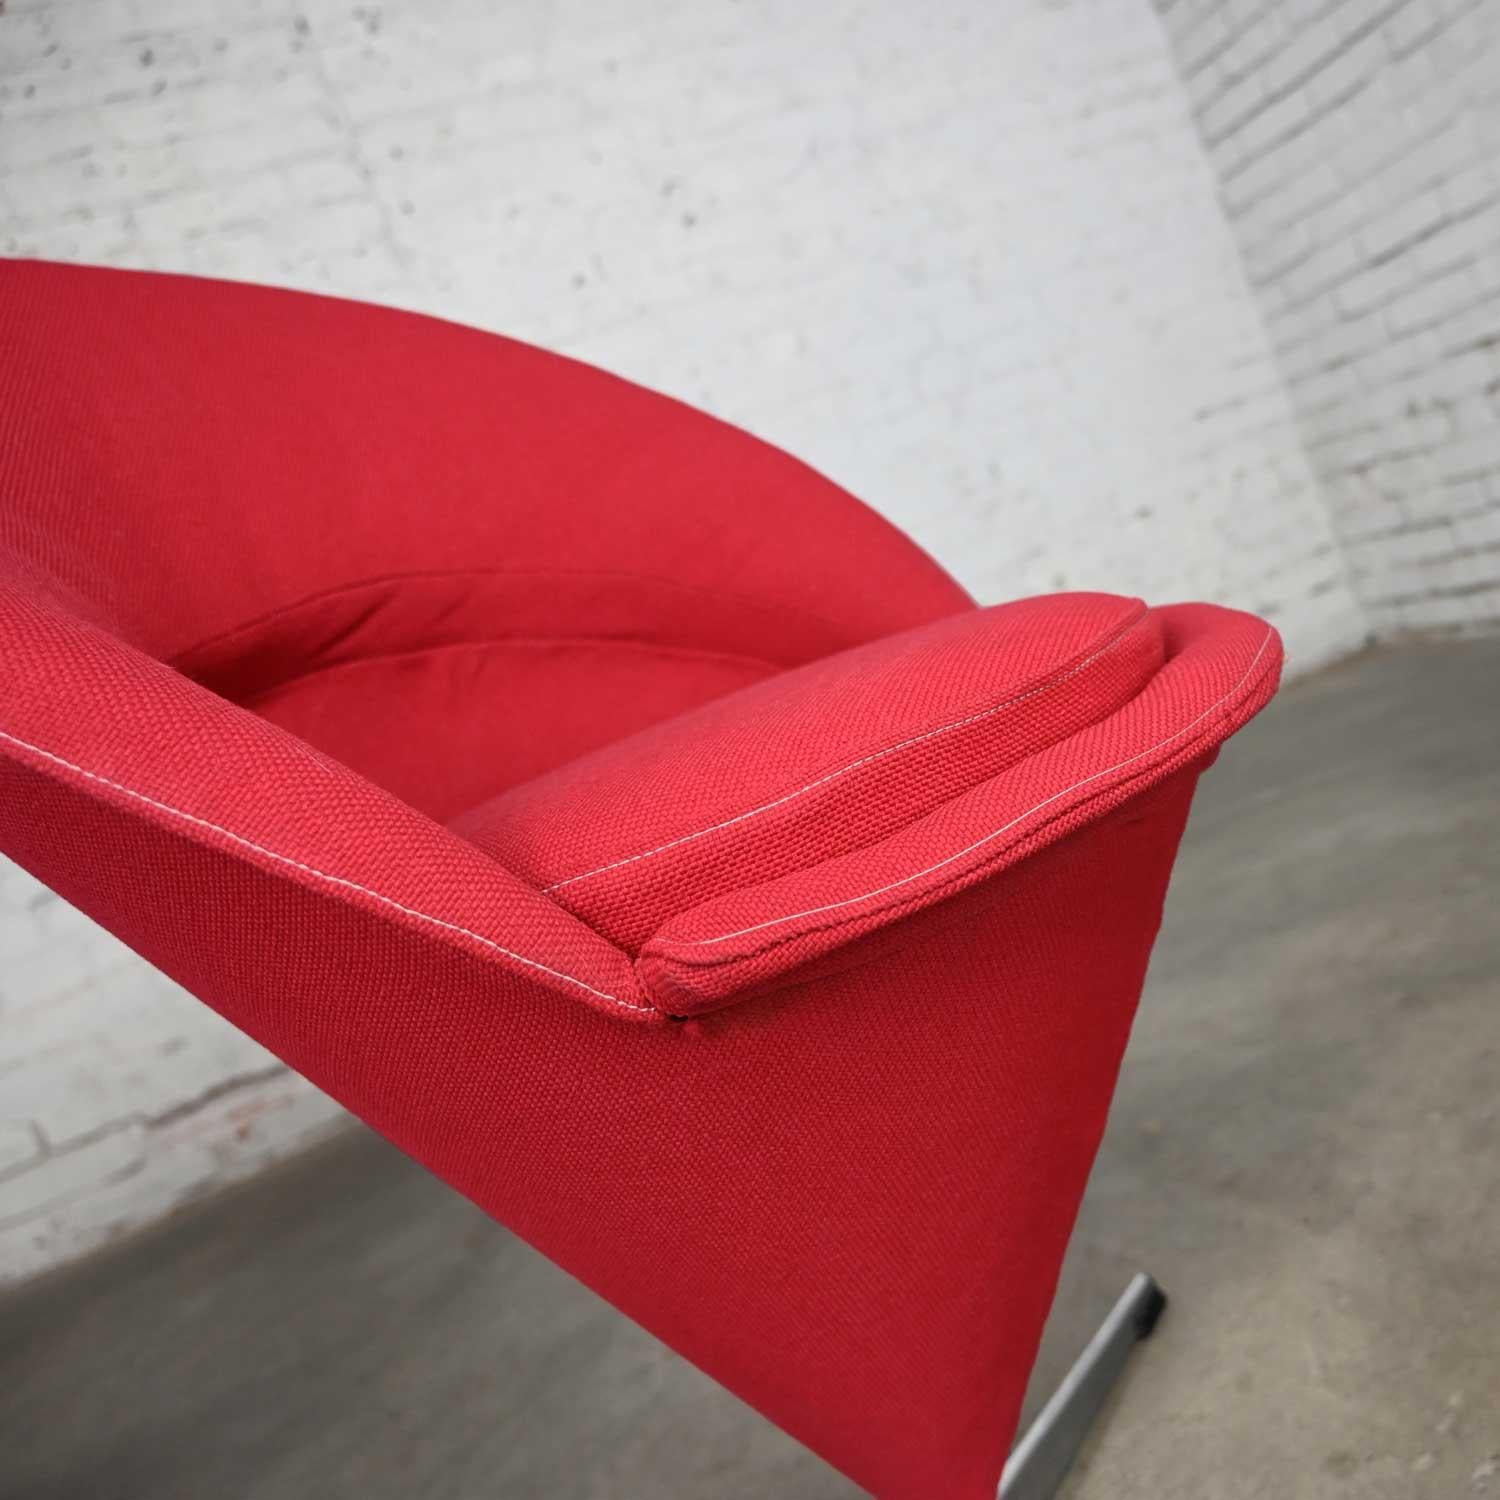 Pair Vintage Mid-Century Modern Red Cone Chairs Verner Panton for Fritz Hansen For Sale 9